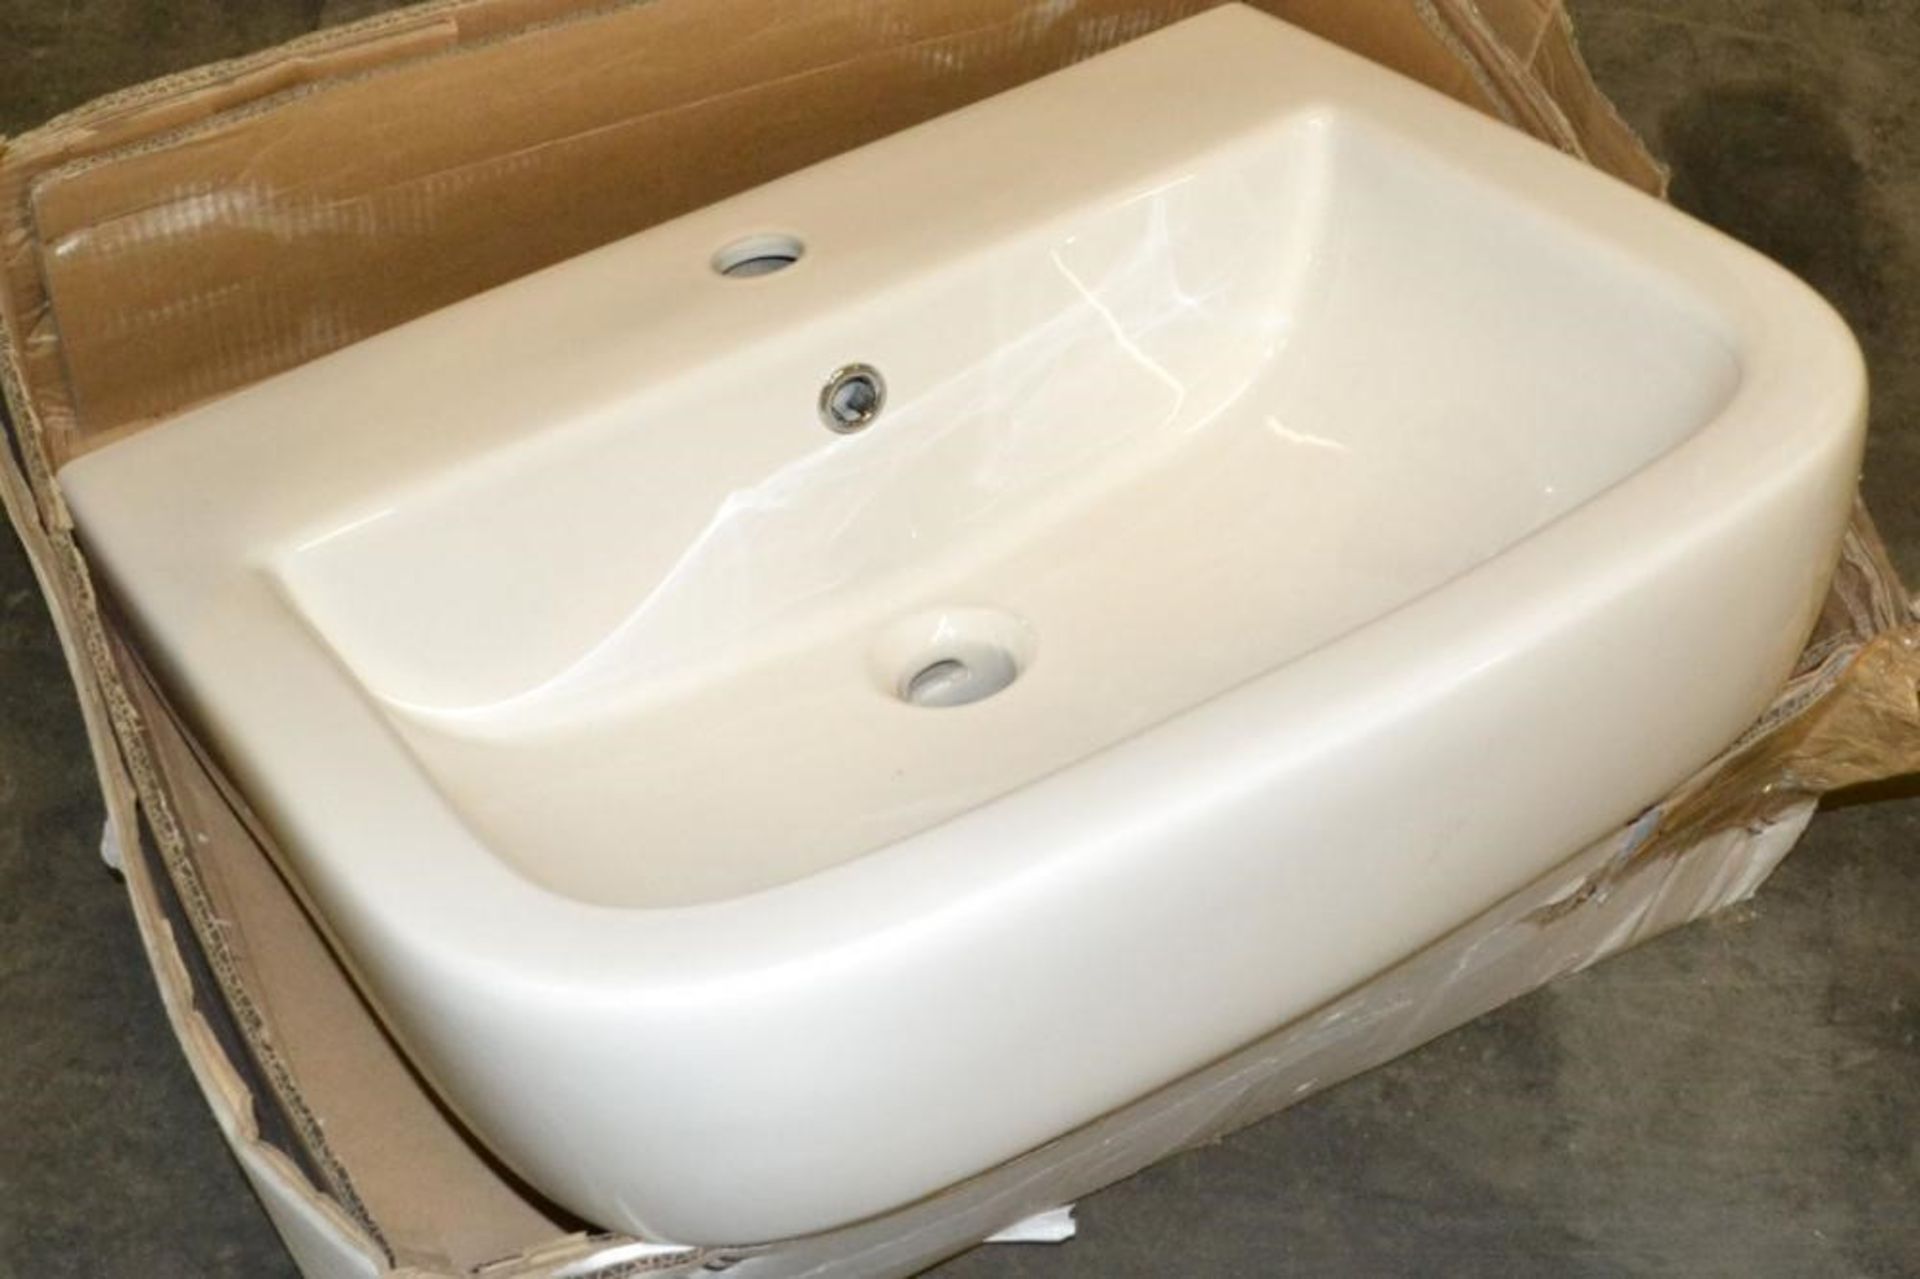 1 x Essence 560mm Basin With One Tap Hole (No Pedestal) - Ref: DY110/L10100 - CL190 - Unused Stock - - Image 2 of 4